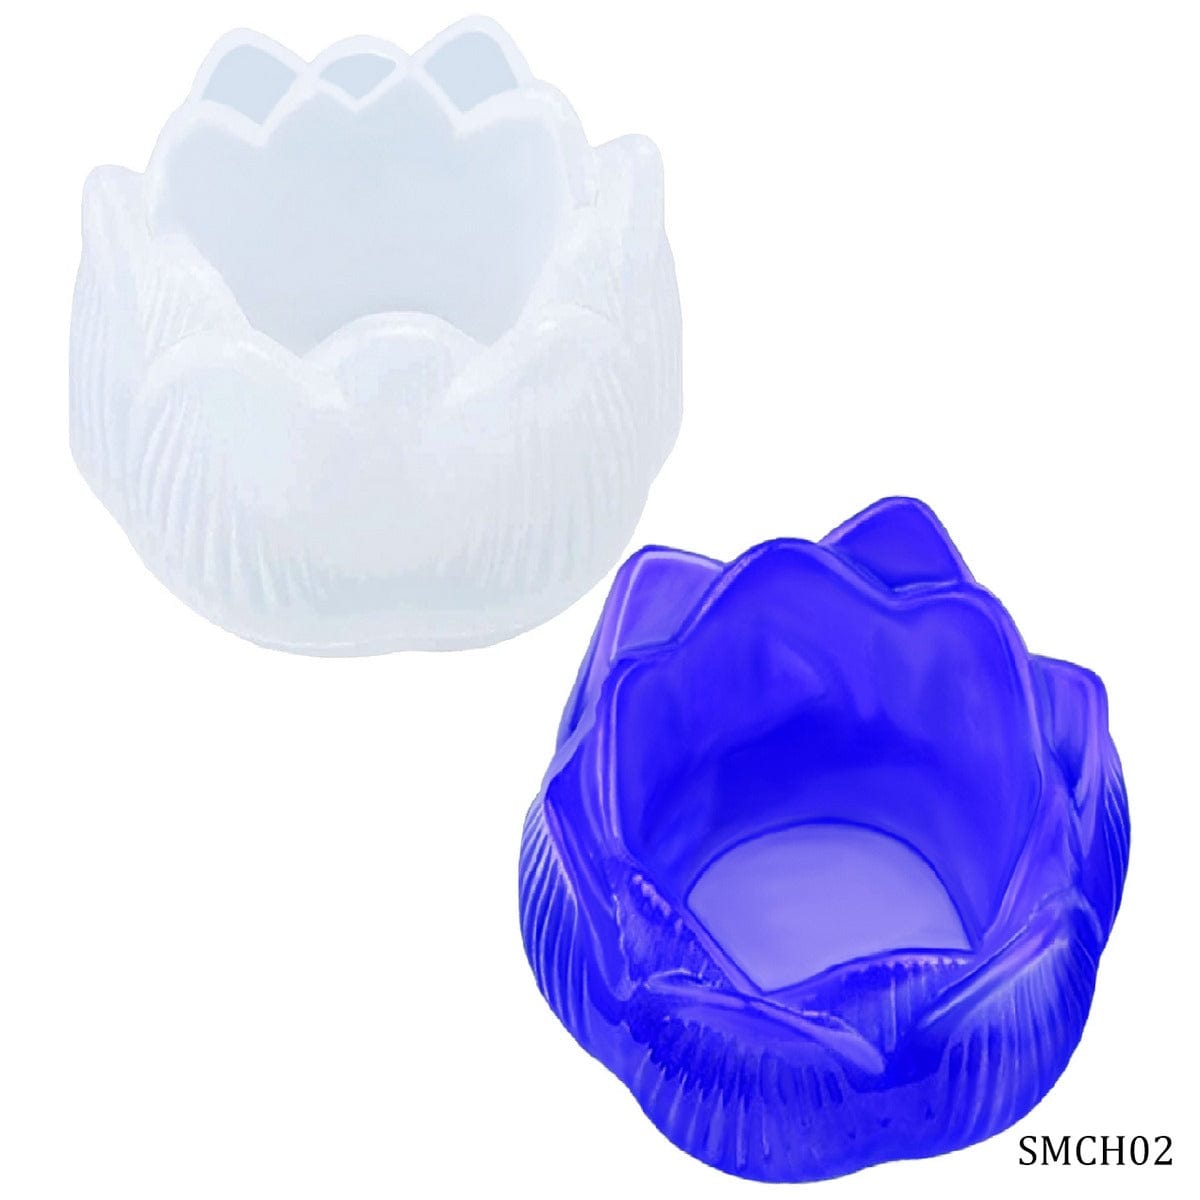 jags-mumbai Mould Silicone Mould Candle Holder Lotus SMCH03